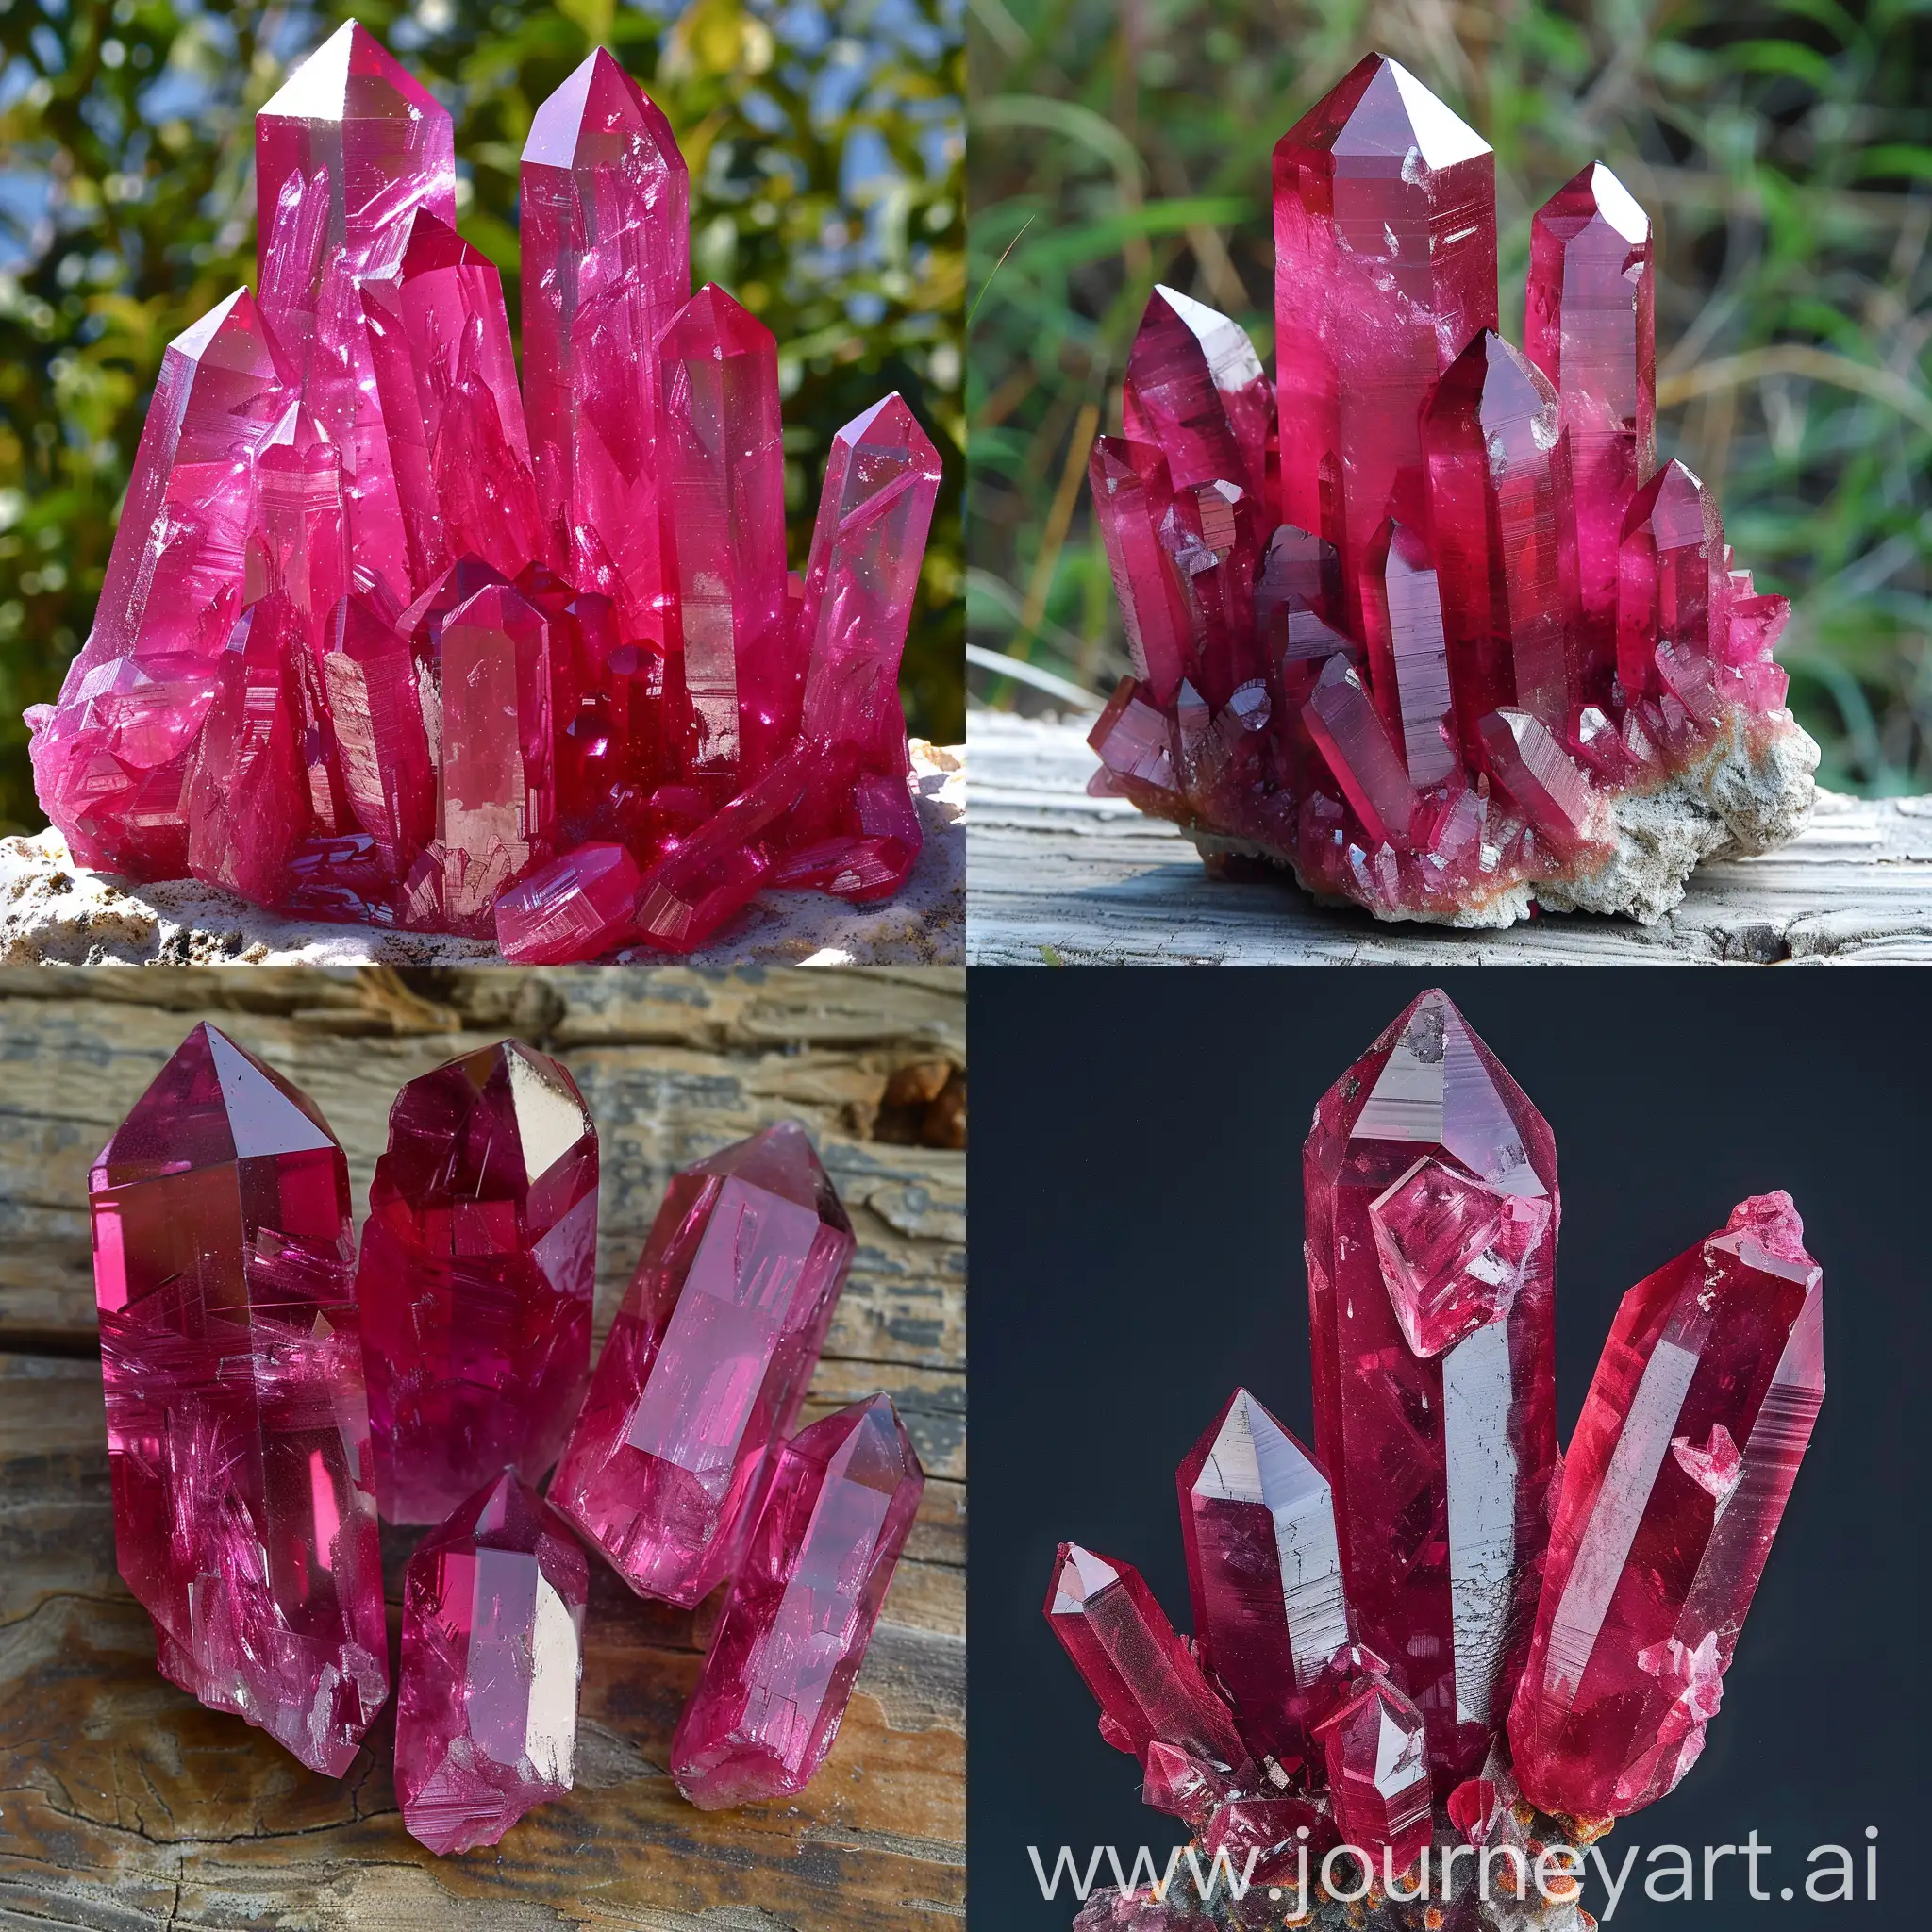 Vibrant-Tall-Ruby-Crystals-in-a-11-Aspect-Ratio-Composition